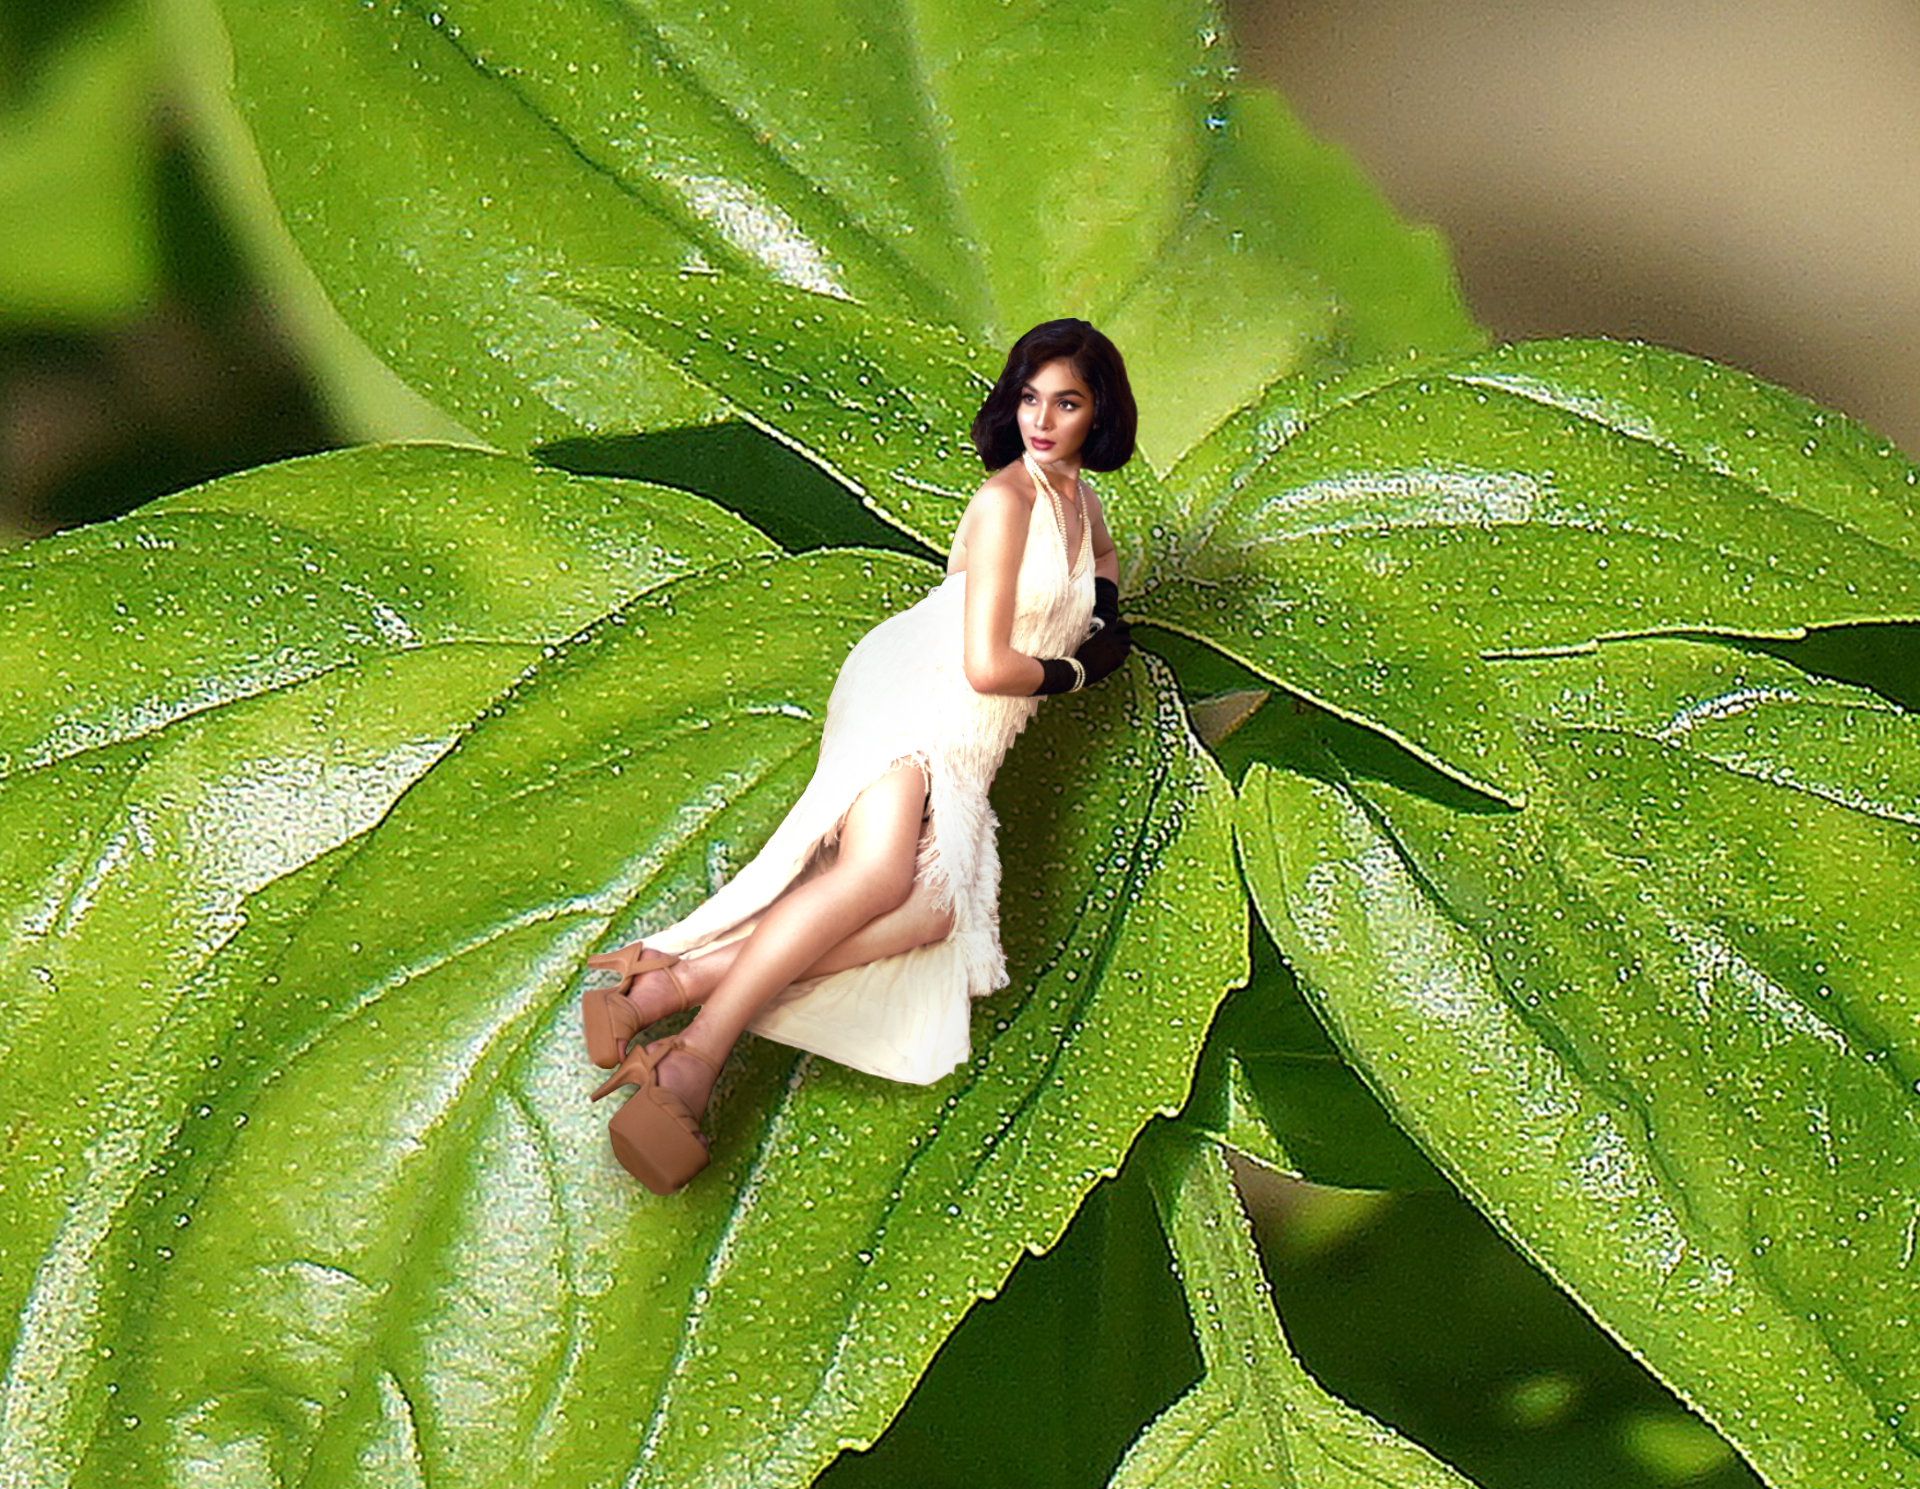 Picture of shrunken person lying on basil leaf